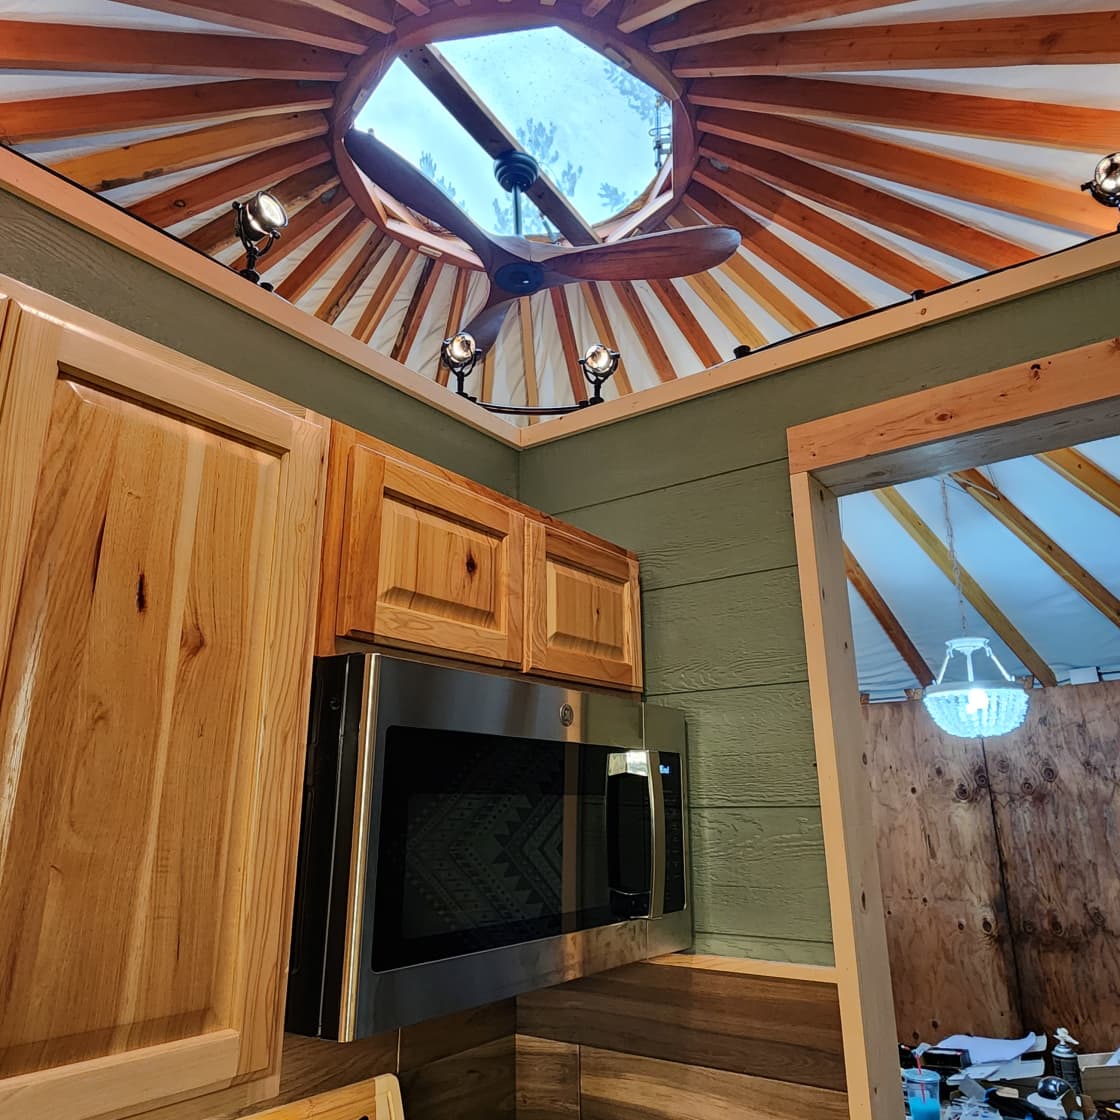 Residential stainless microwave oven and remote-controlled ceiling fan in yurt. Lots of lighting throughout.